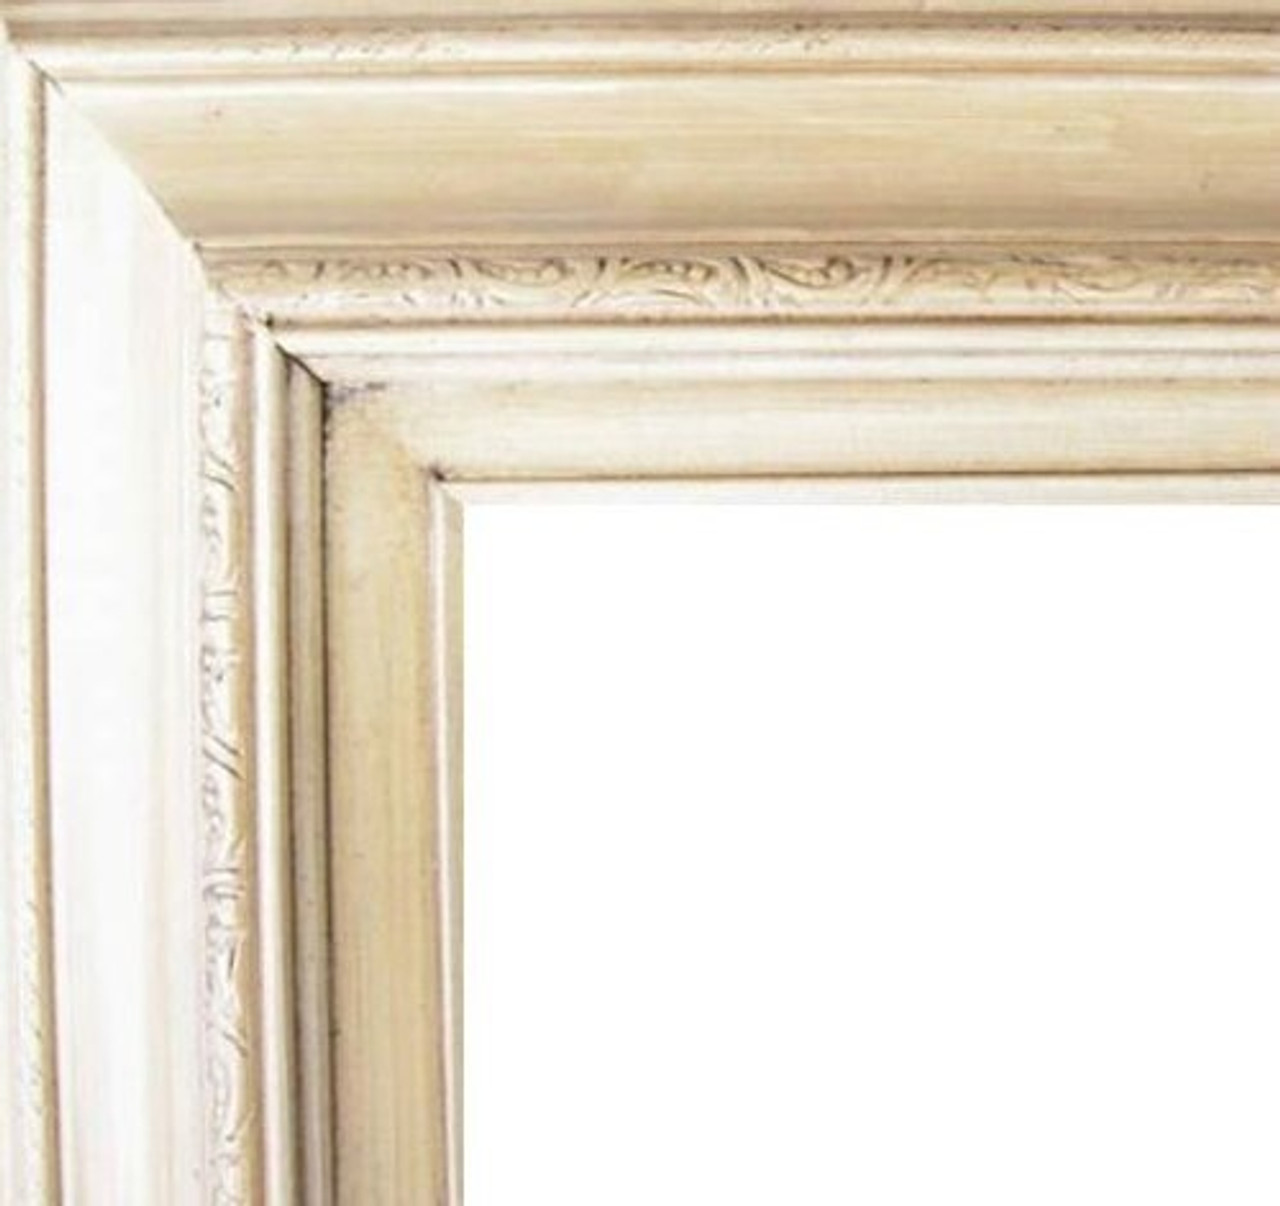 3 Inch Deluxe Wood Frames: 40X60